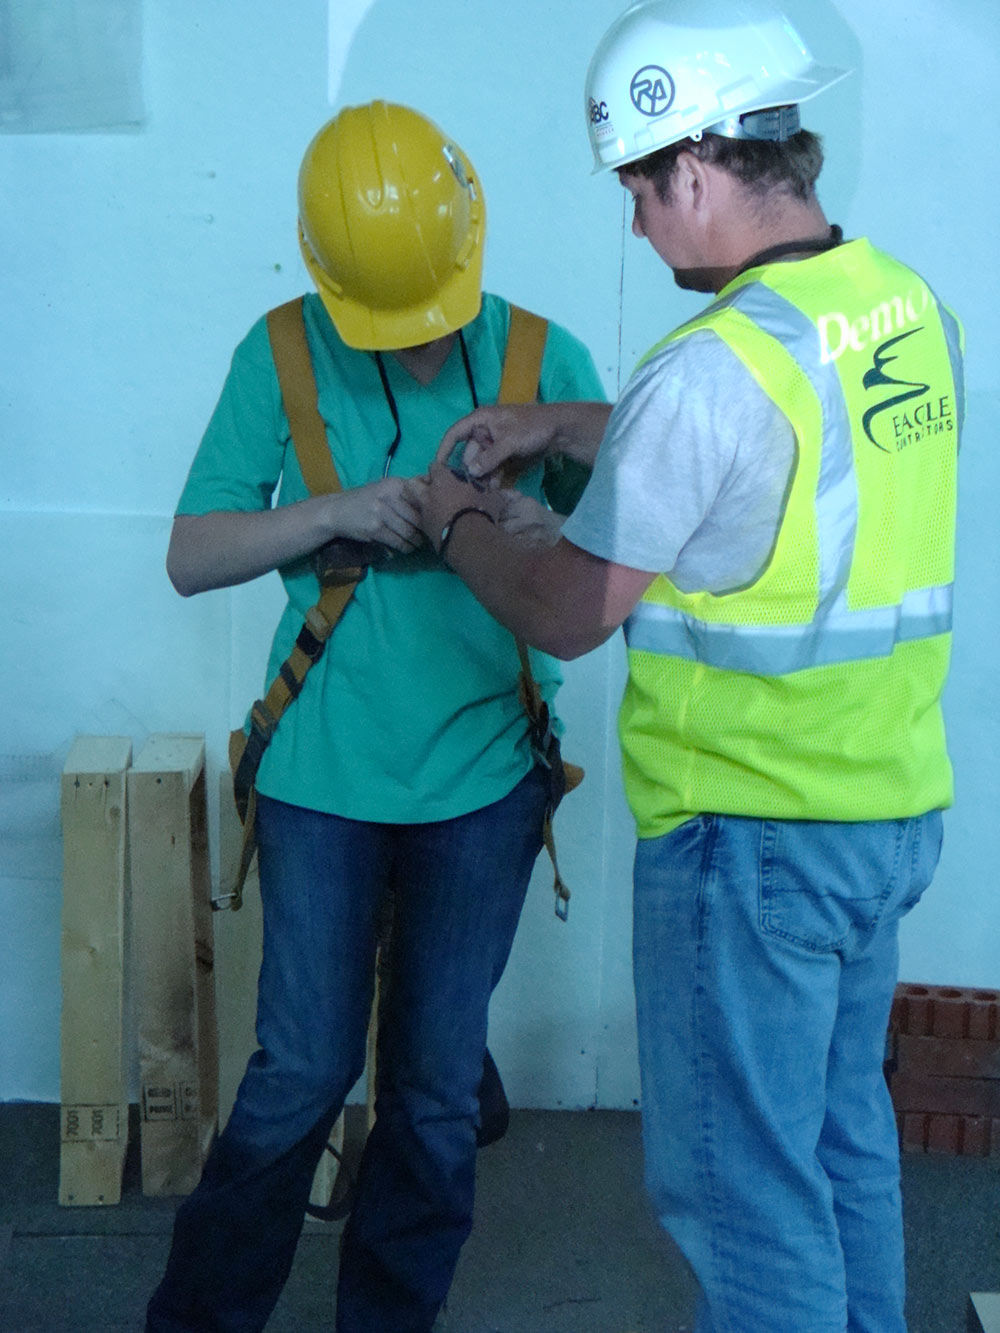 person helping another put on harness